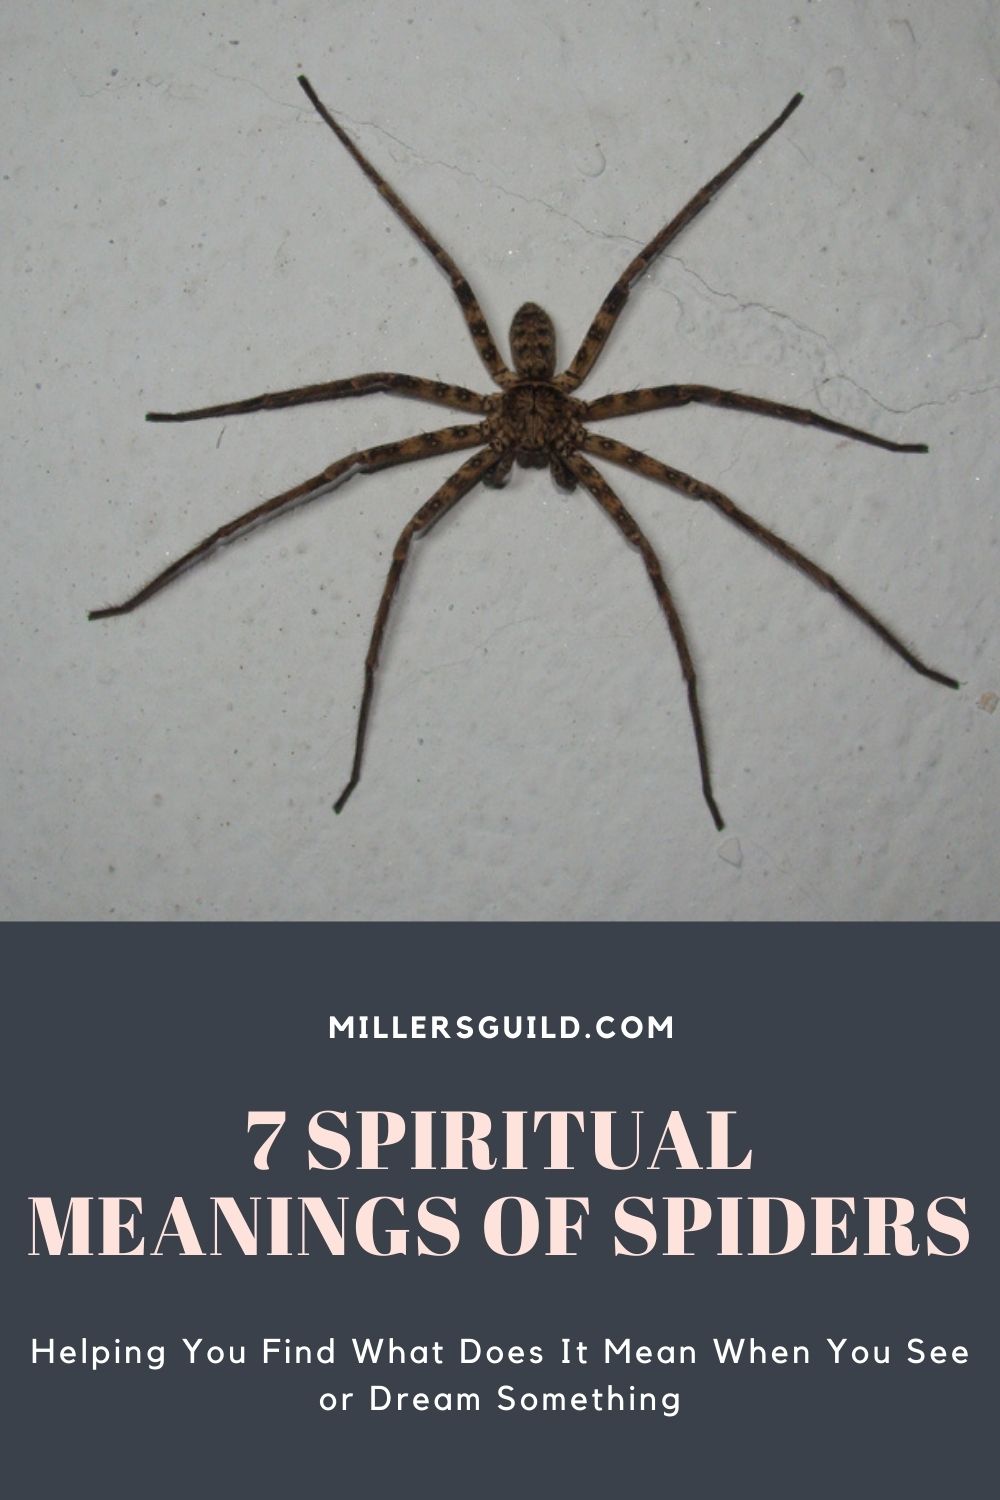 7 Spiritual Meanings of Spiders - Miller's Guild